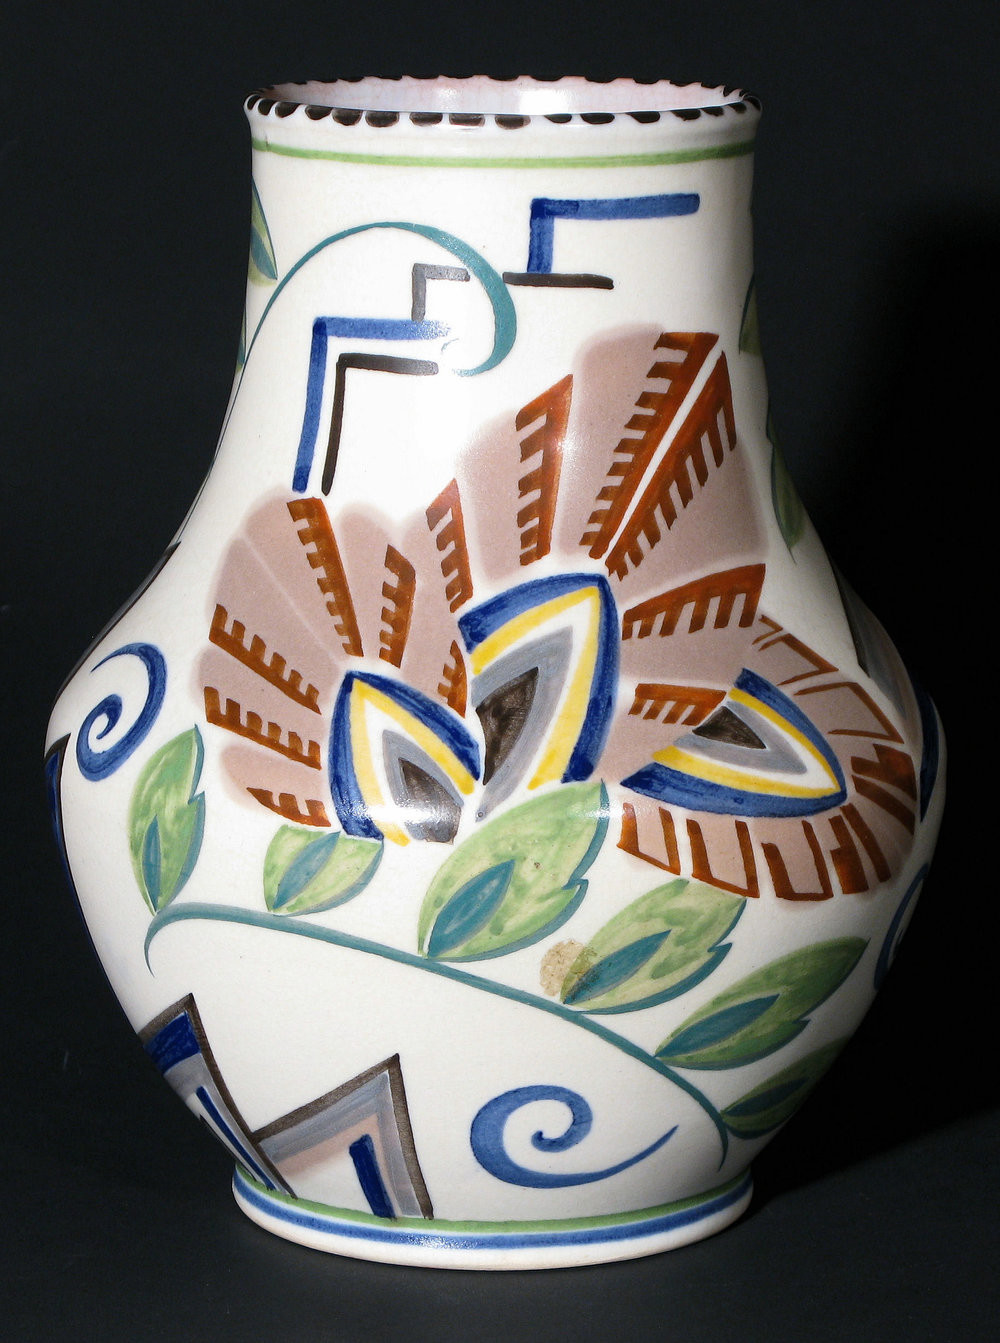 23 Amazing Blue John Vases for Sale 2024 free download blue john vases for sale of traditional the virtual museum of poole pottery inside one of the more striking geometric patterns is kn the combination of blue and yellow and bold lightning str